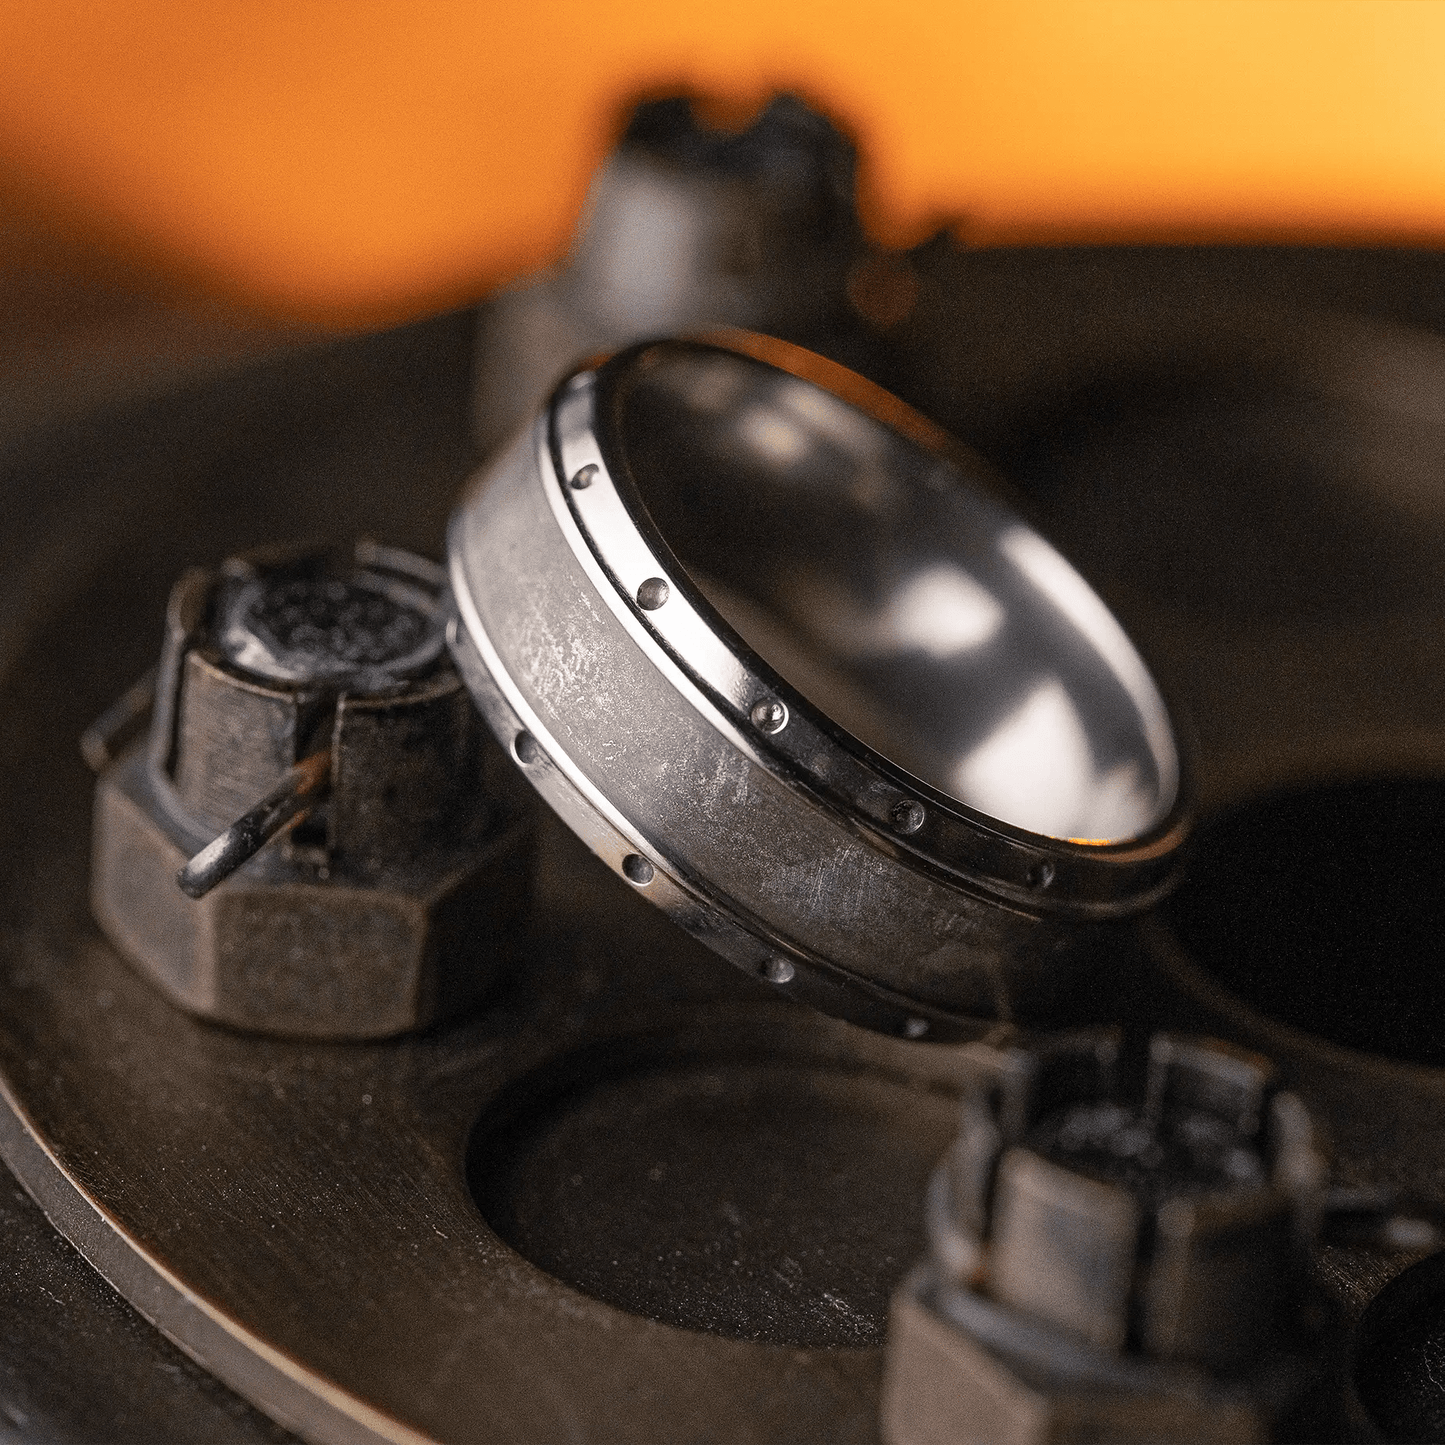 The Lawley - Men's Wedding Rings - Manly Bands